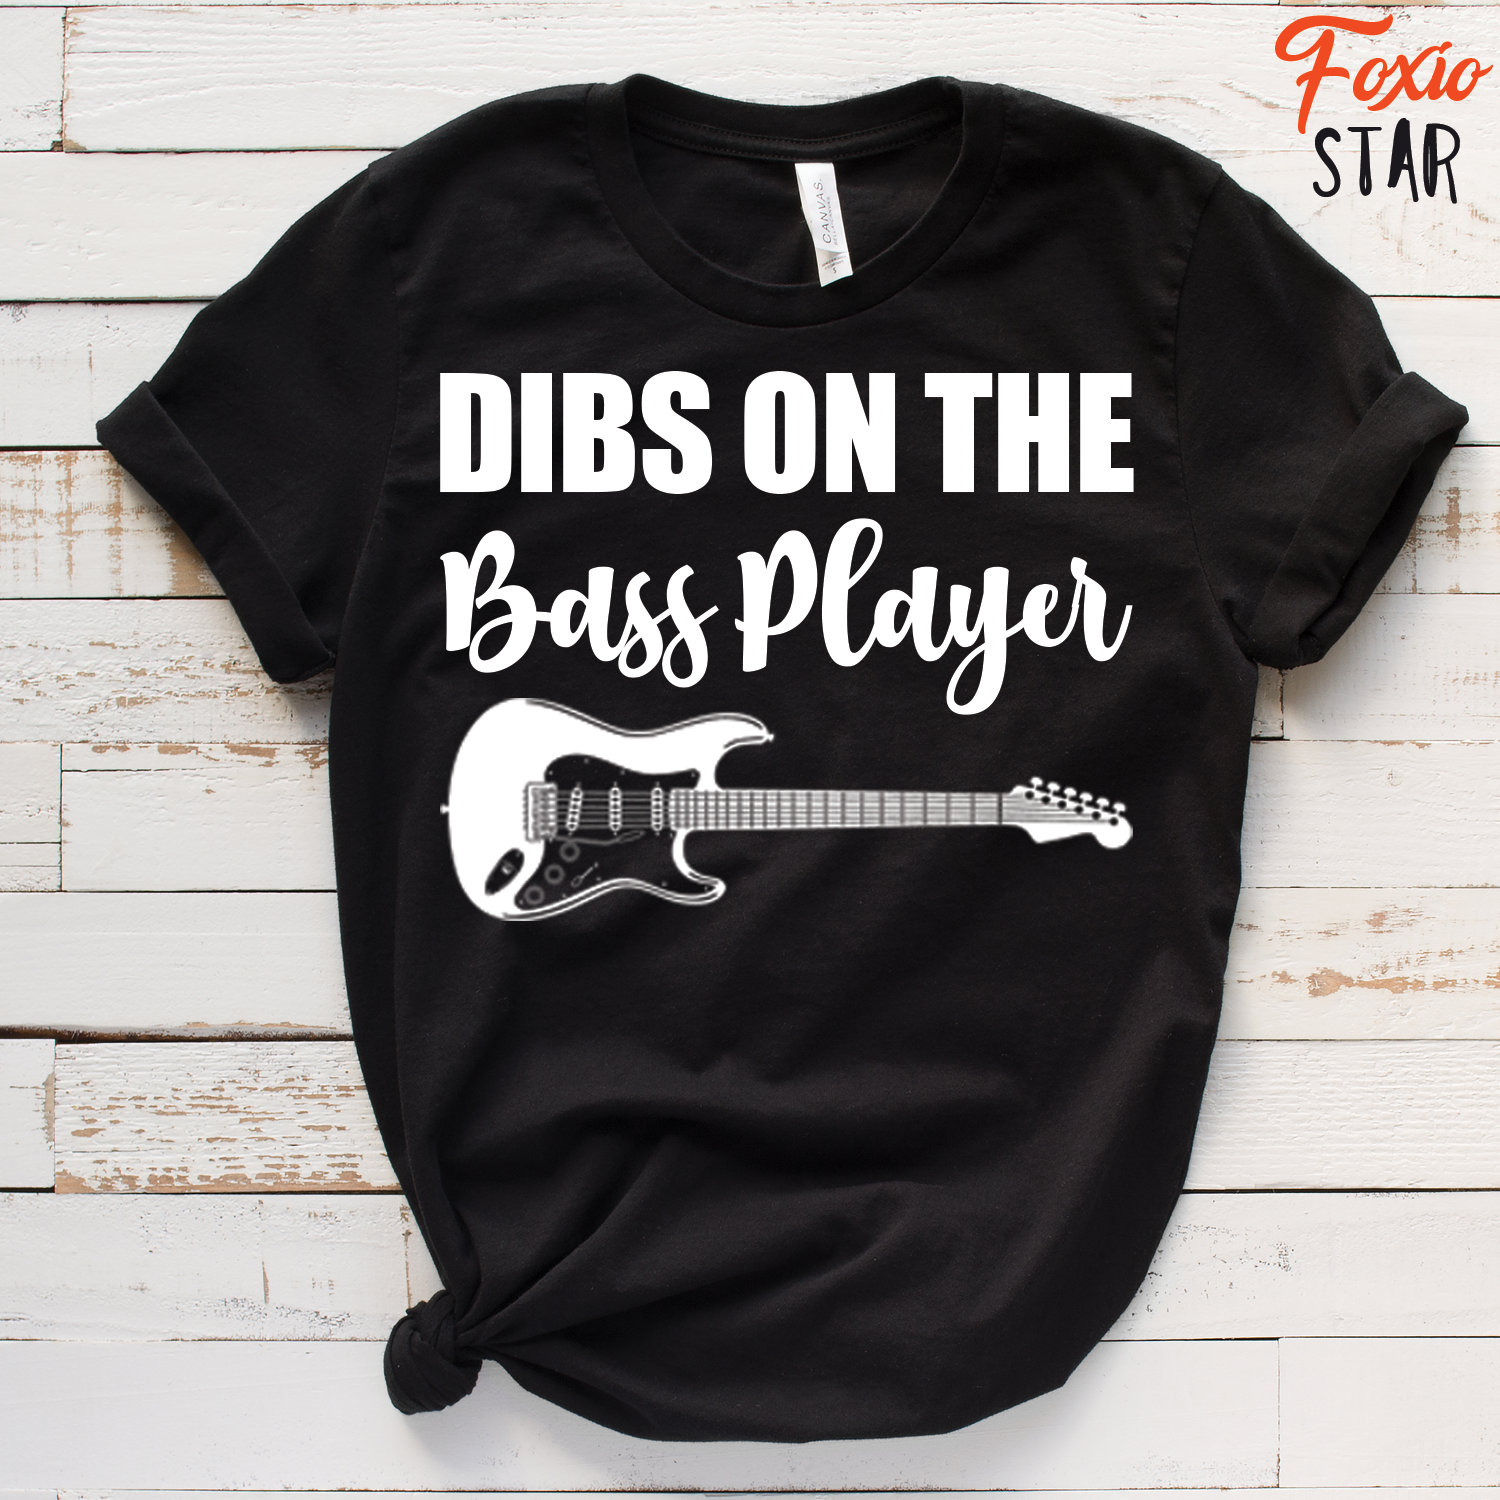 Dibs on the Bass Player Shirt, Bassist, Guitarist, Funny Guitar